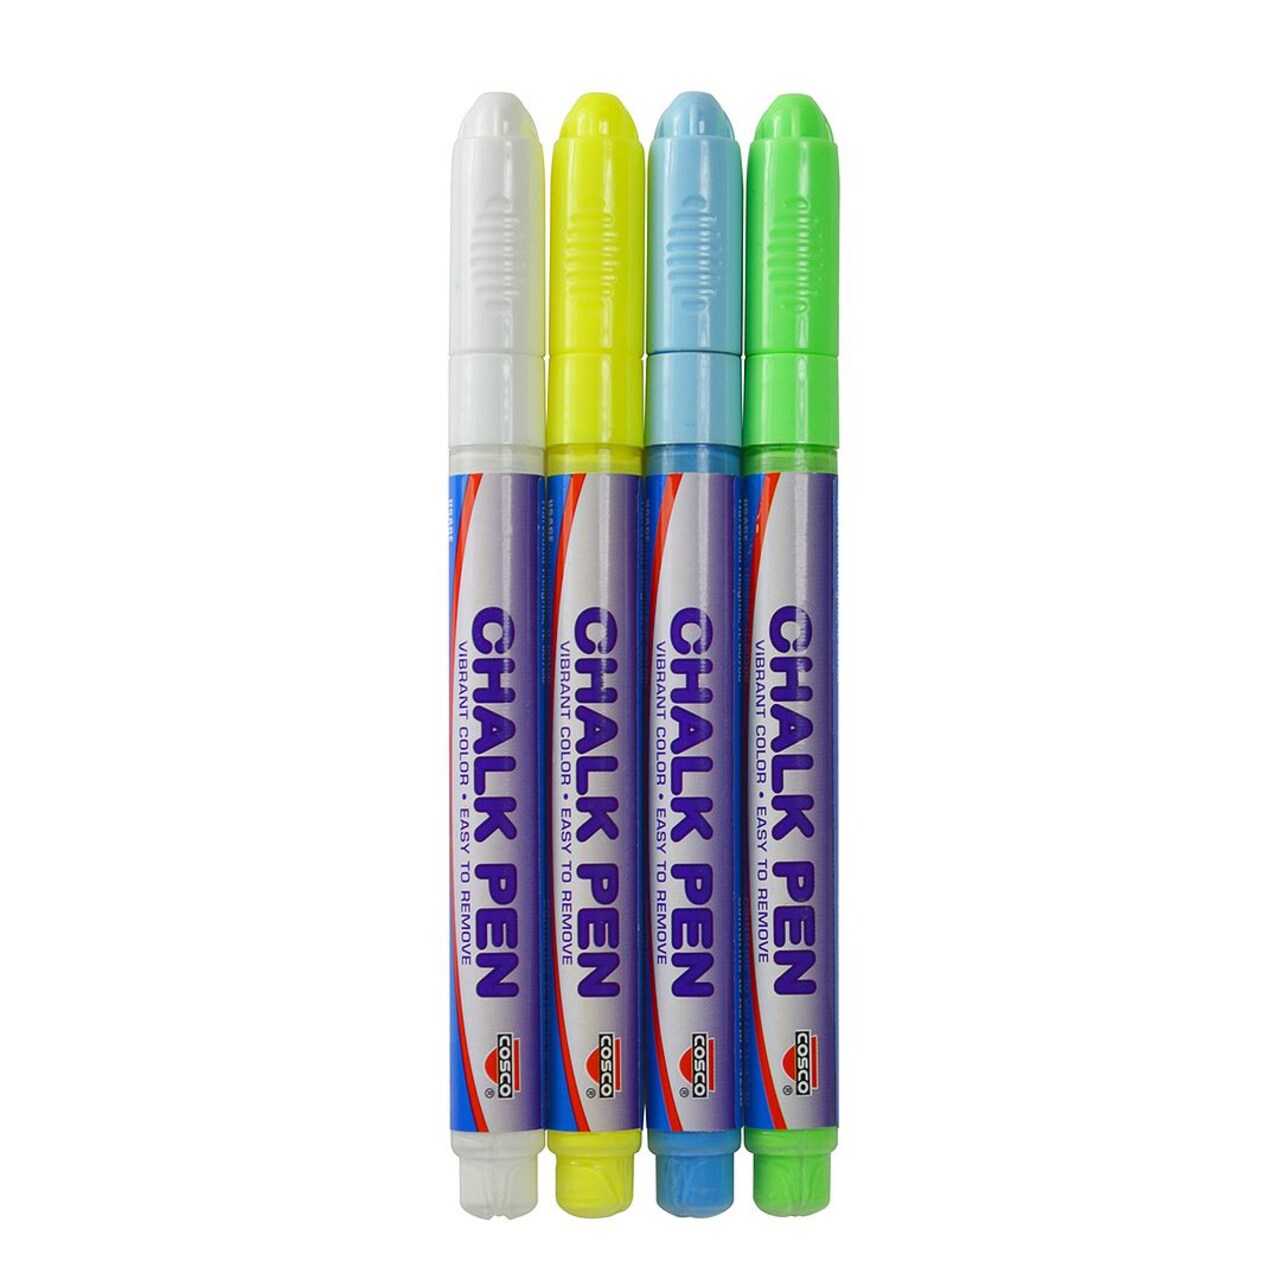 COSCO Chalk Pen Markers, 4-Pack, White, Green, Blue and Yellow